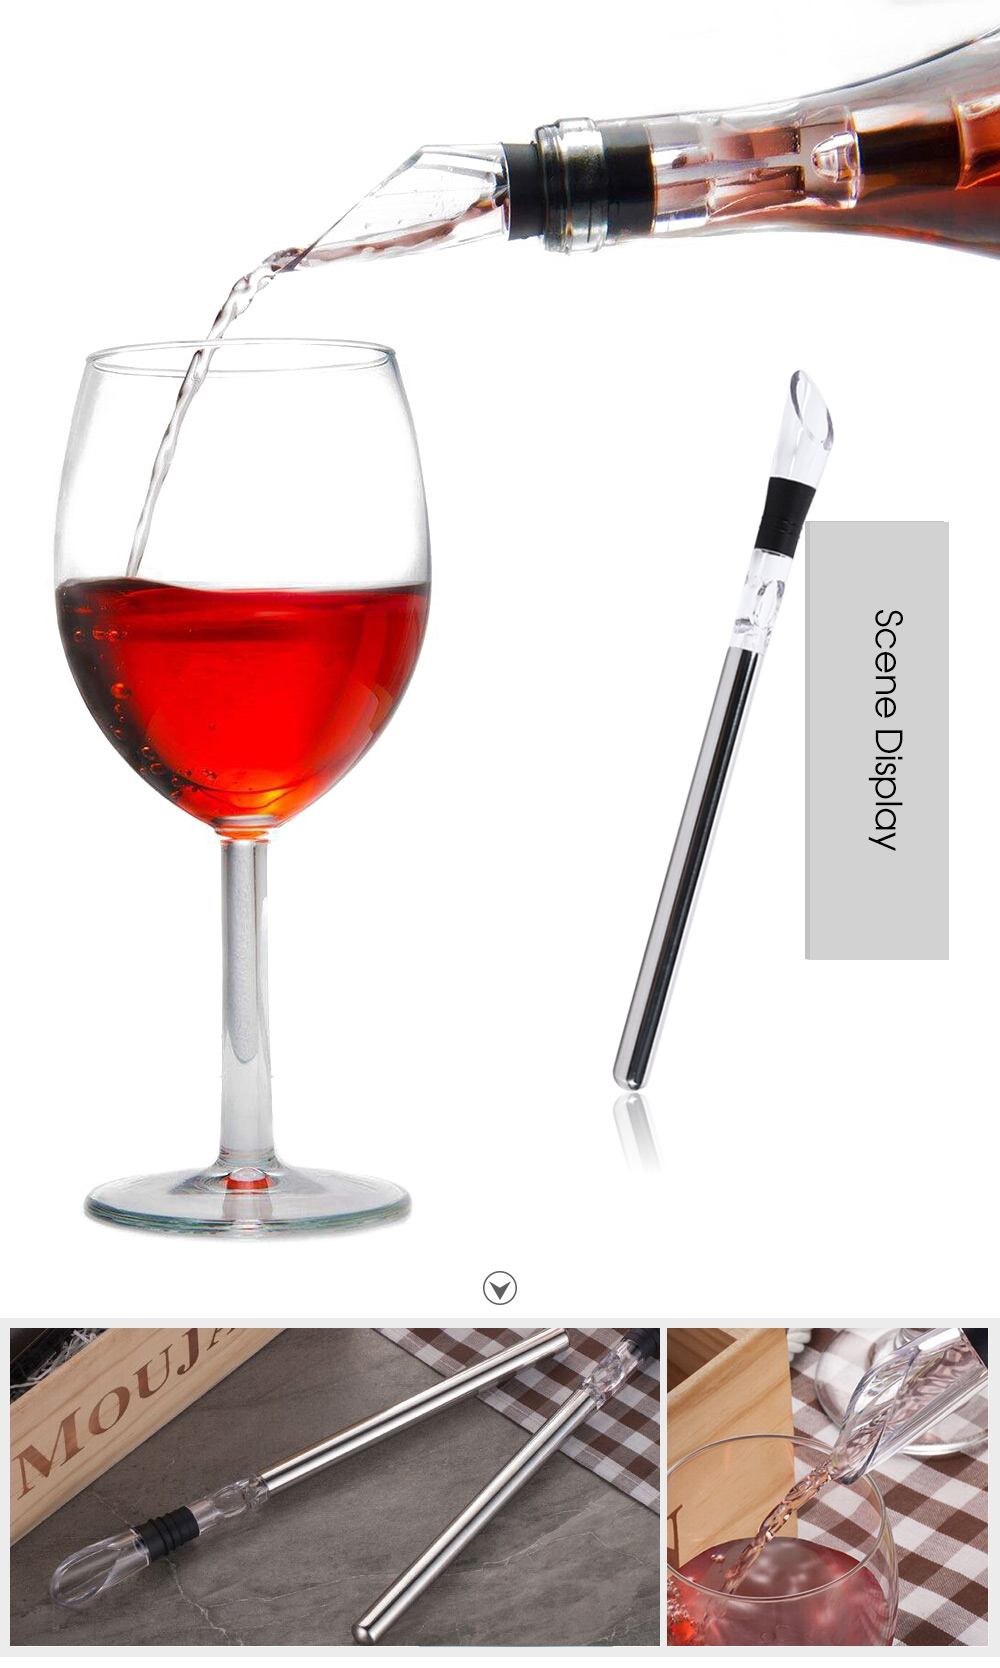 3 in 1 Stainless Steel Wine Chiller Stick with Aerator and Pourer for Whiskey Champagne